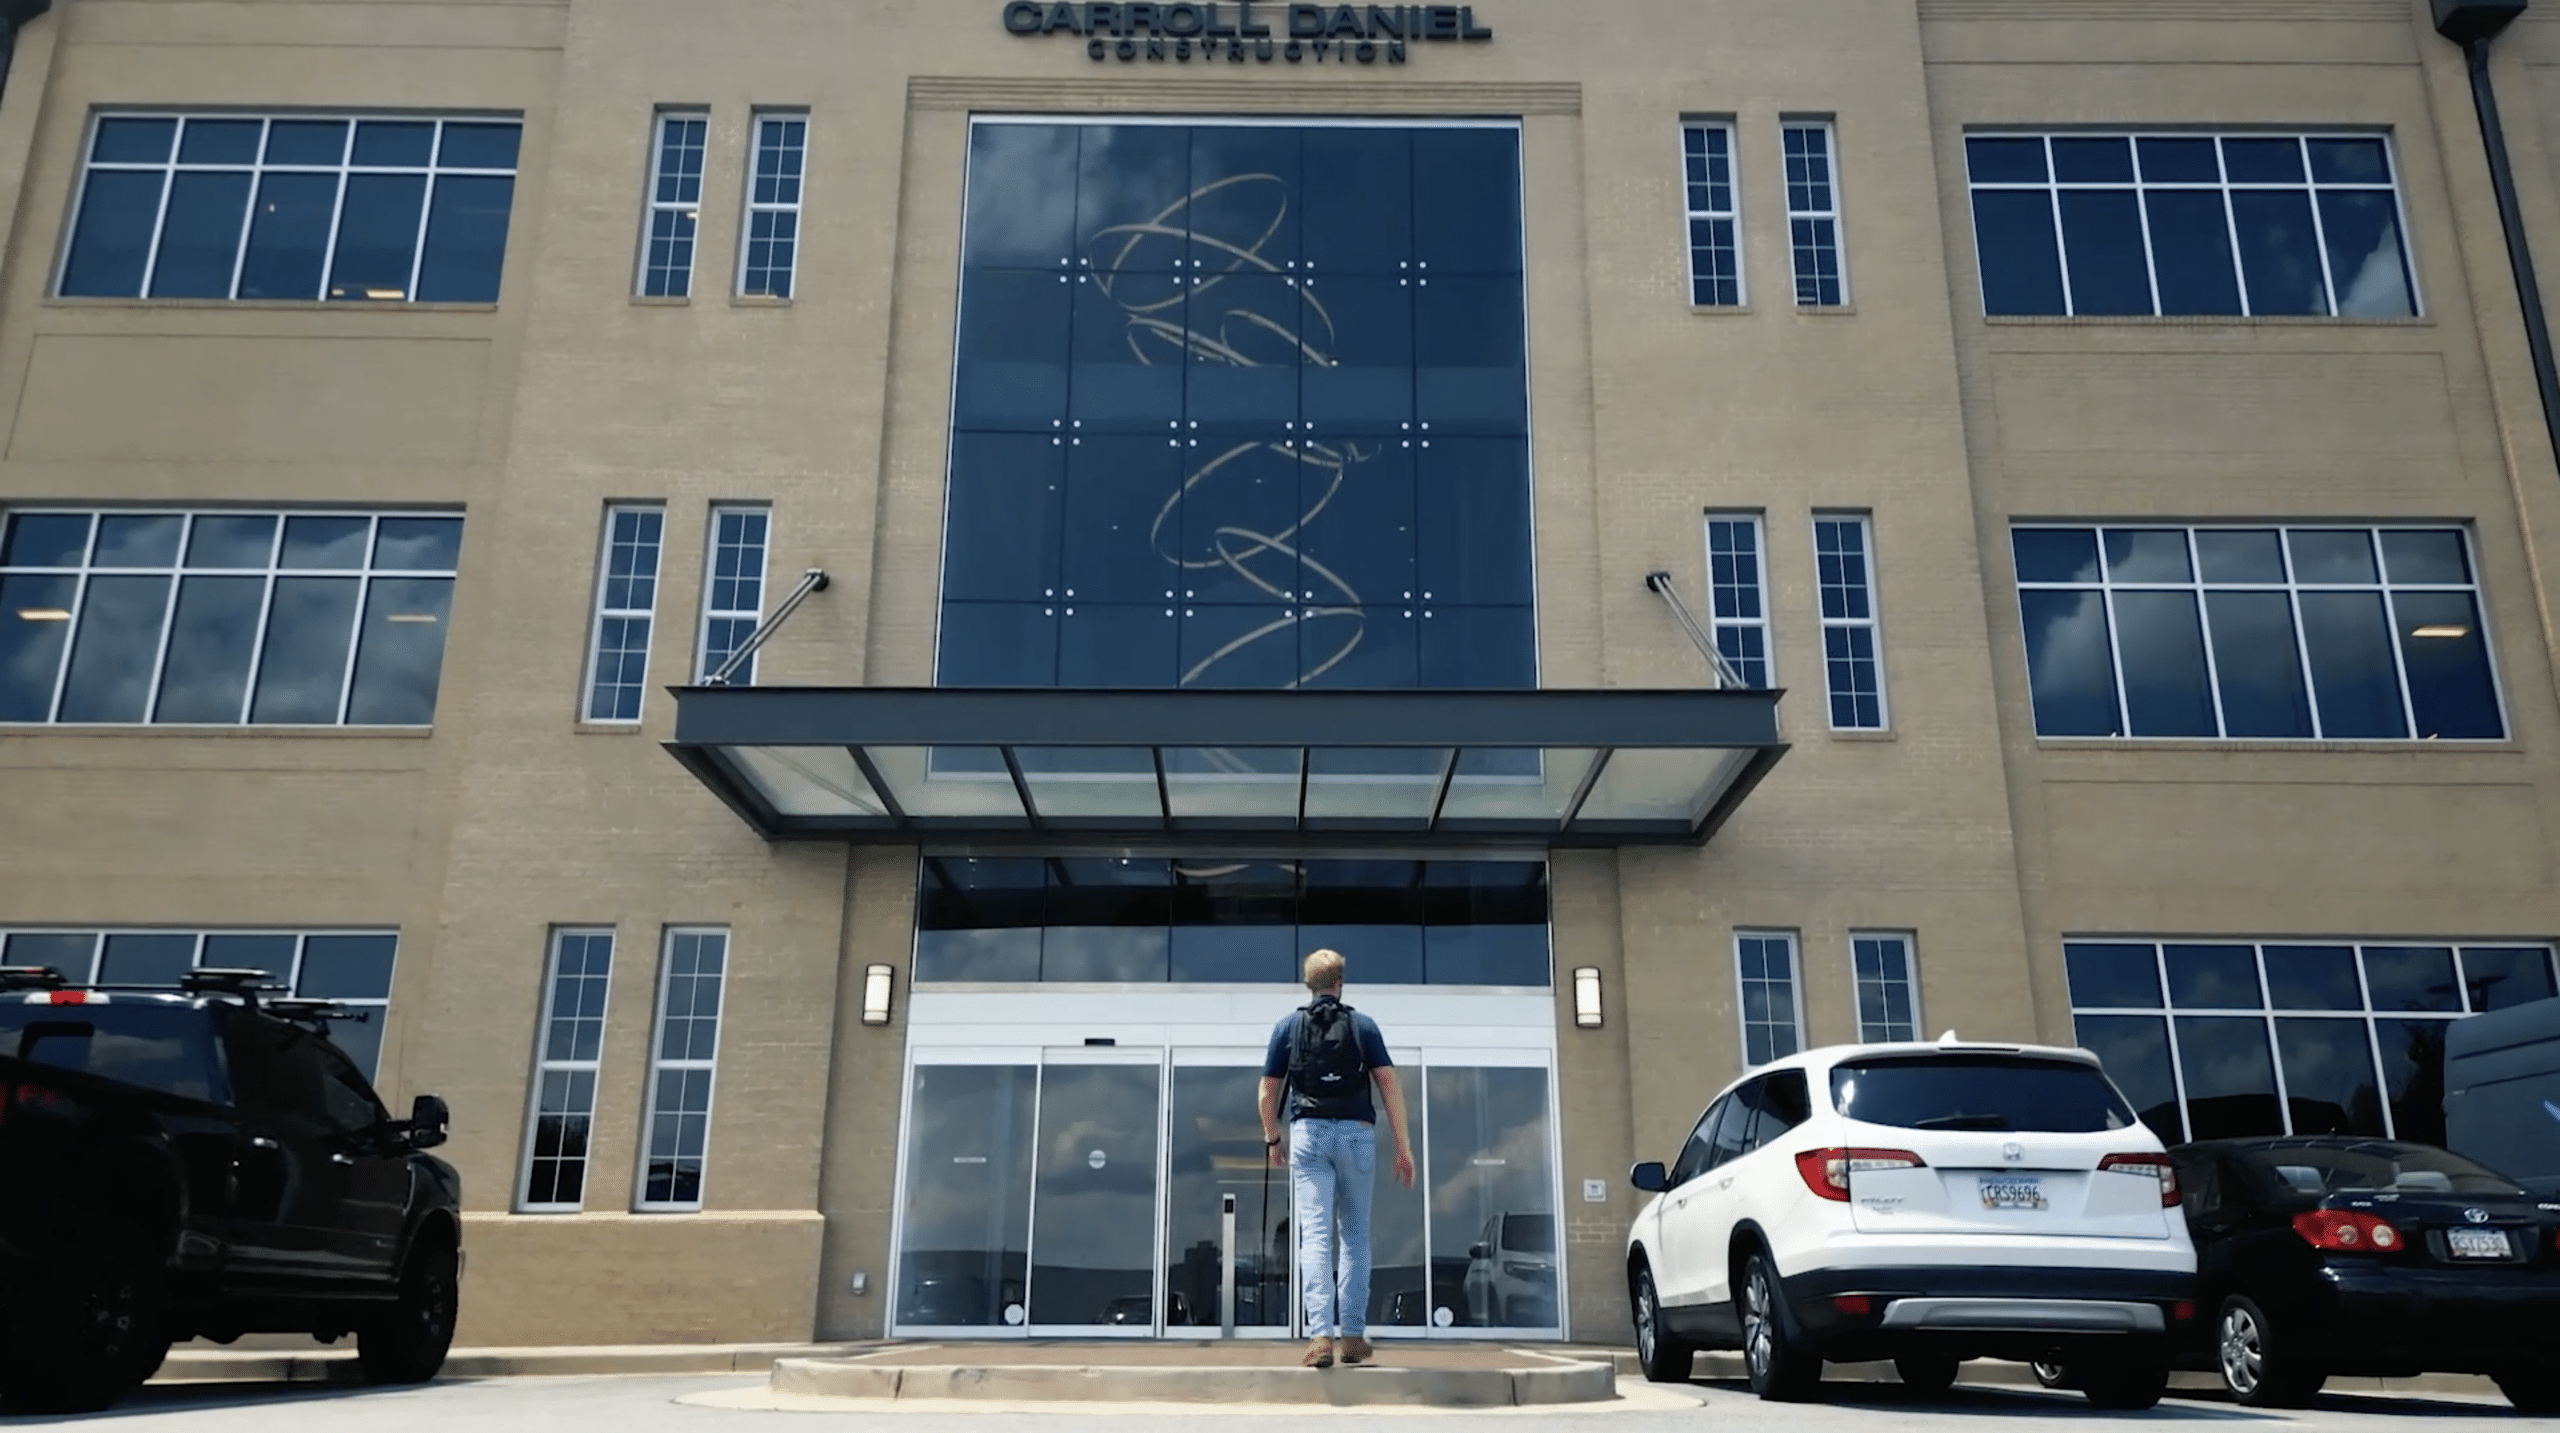 picture of an intern walking into the front doors of carroll daniel construction's gainesville, georgia office building